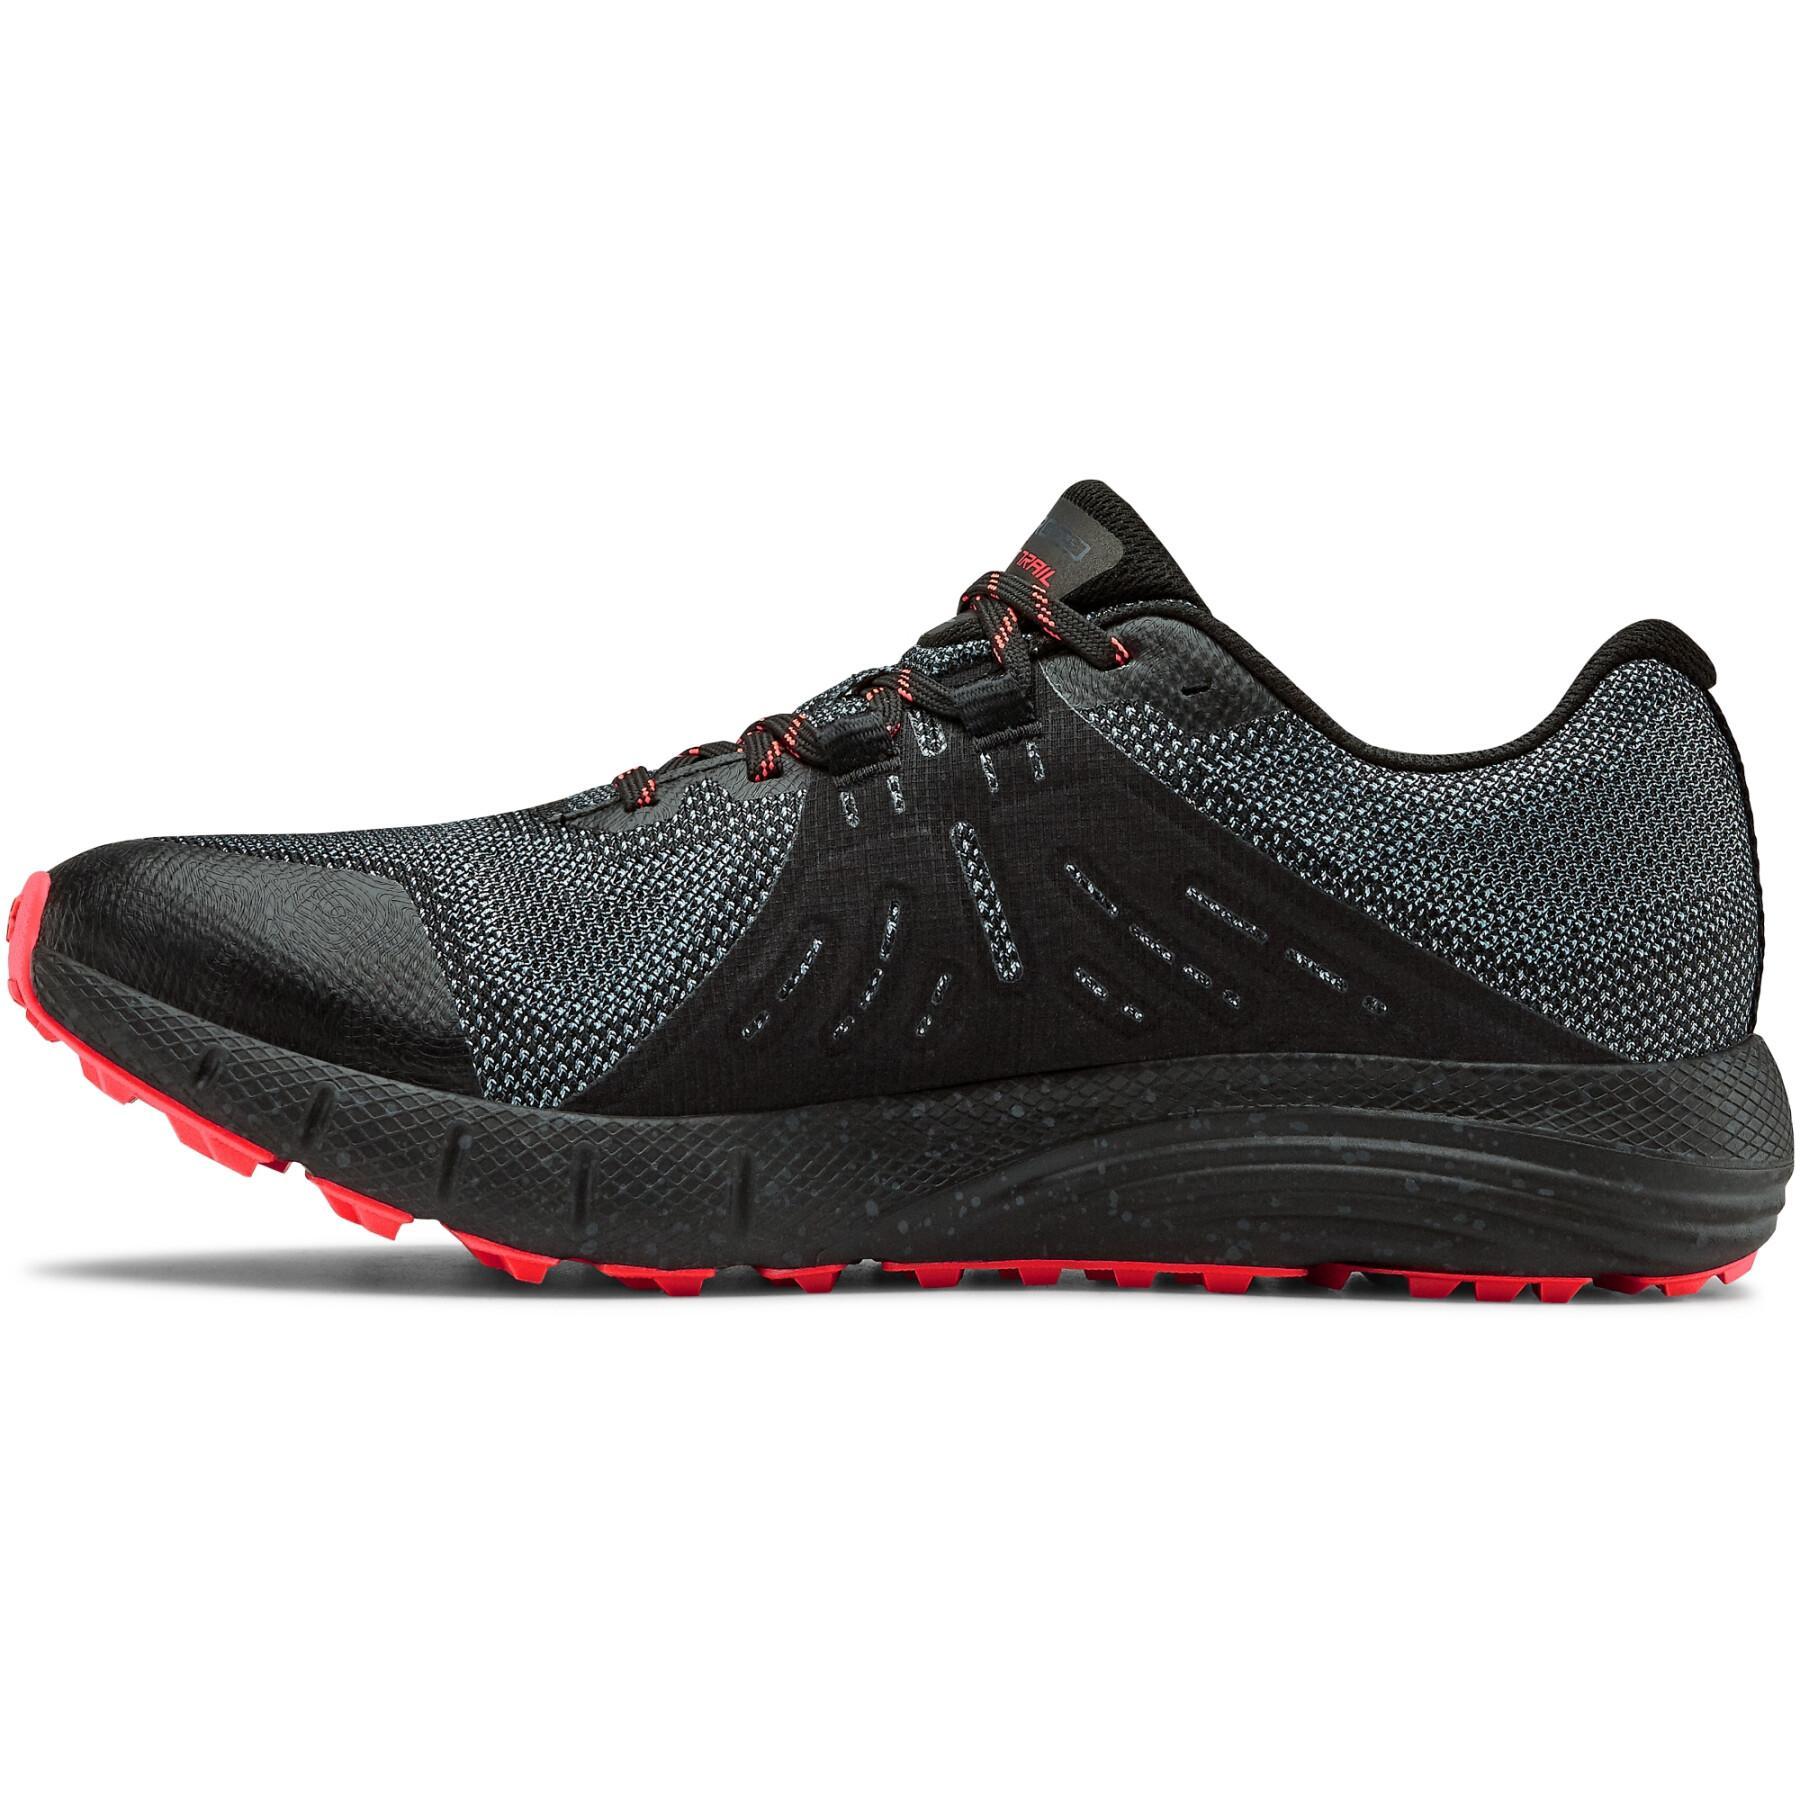 Chaussures de running Under Armour Charged Bandit Trail GORE-TEX